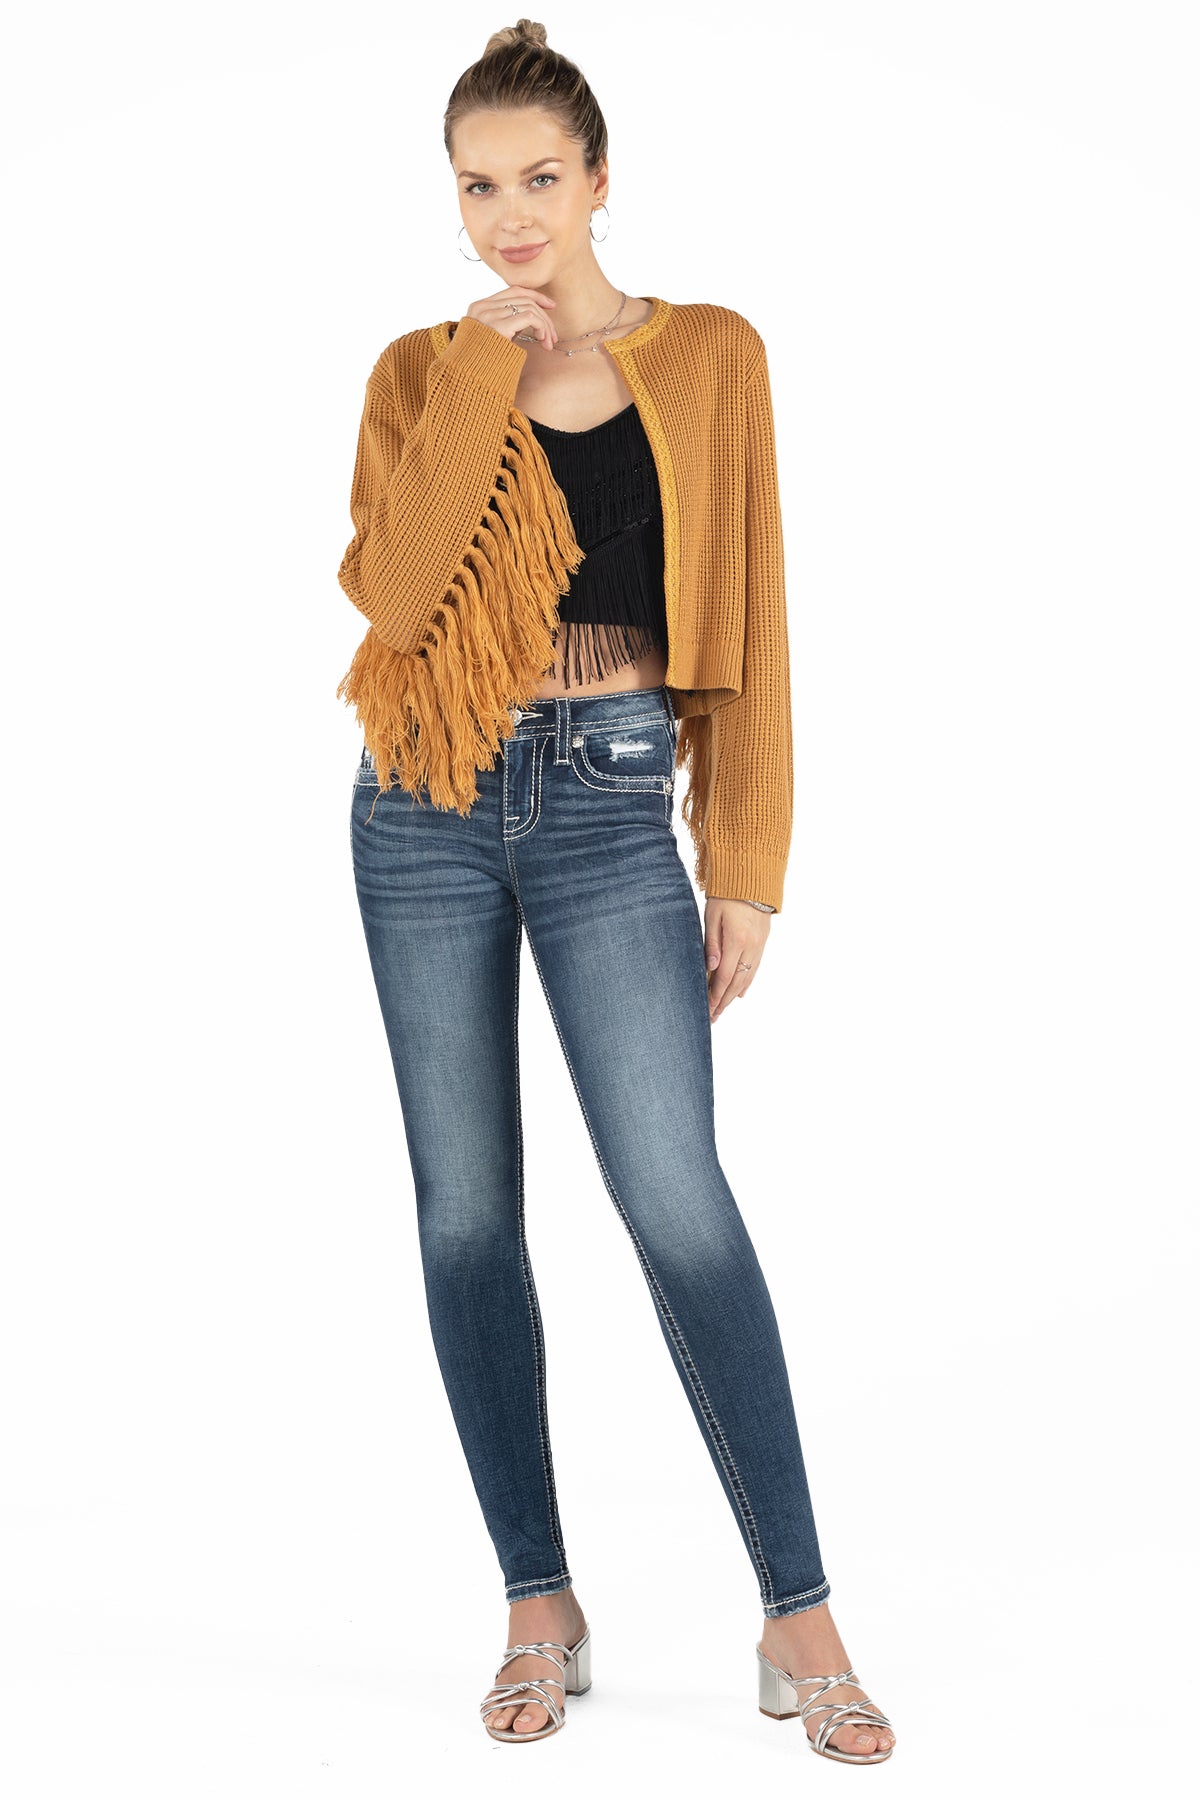 Fringe Knitted Cardigan | Only $69.00 | Brown | Miss Me